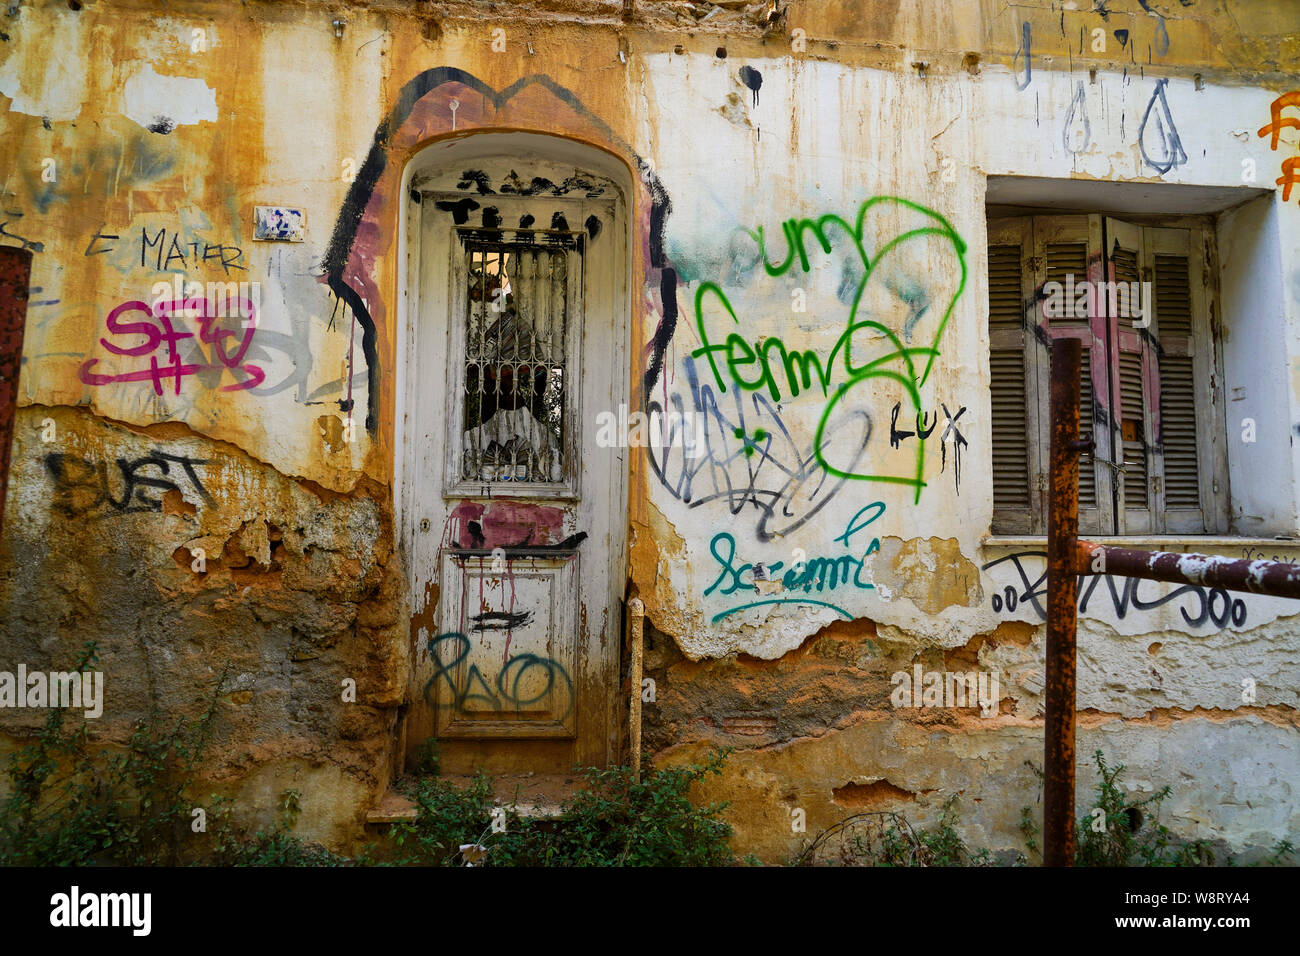 Athens, Greece, Graffiti on a wall of an old deserted and dilapidated building Stock Photo